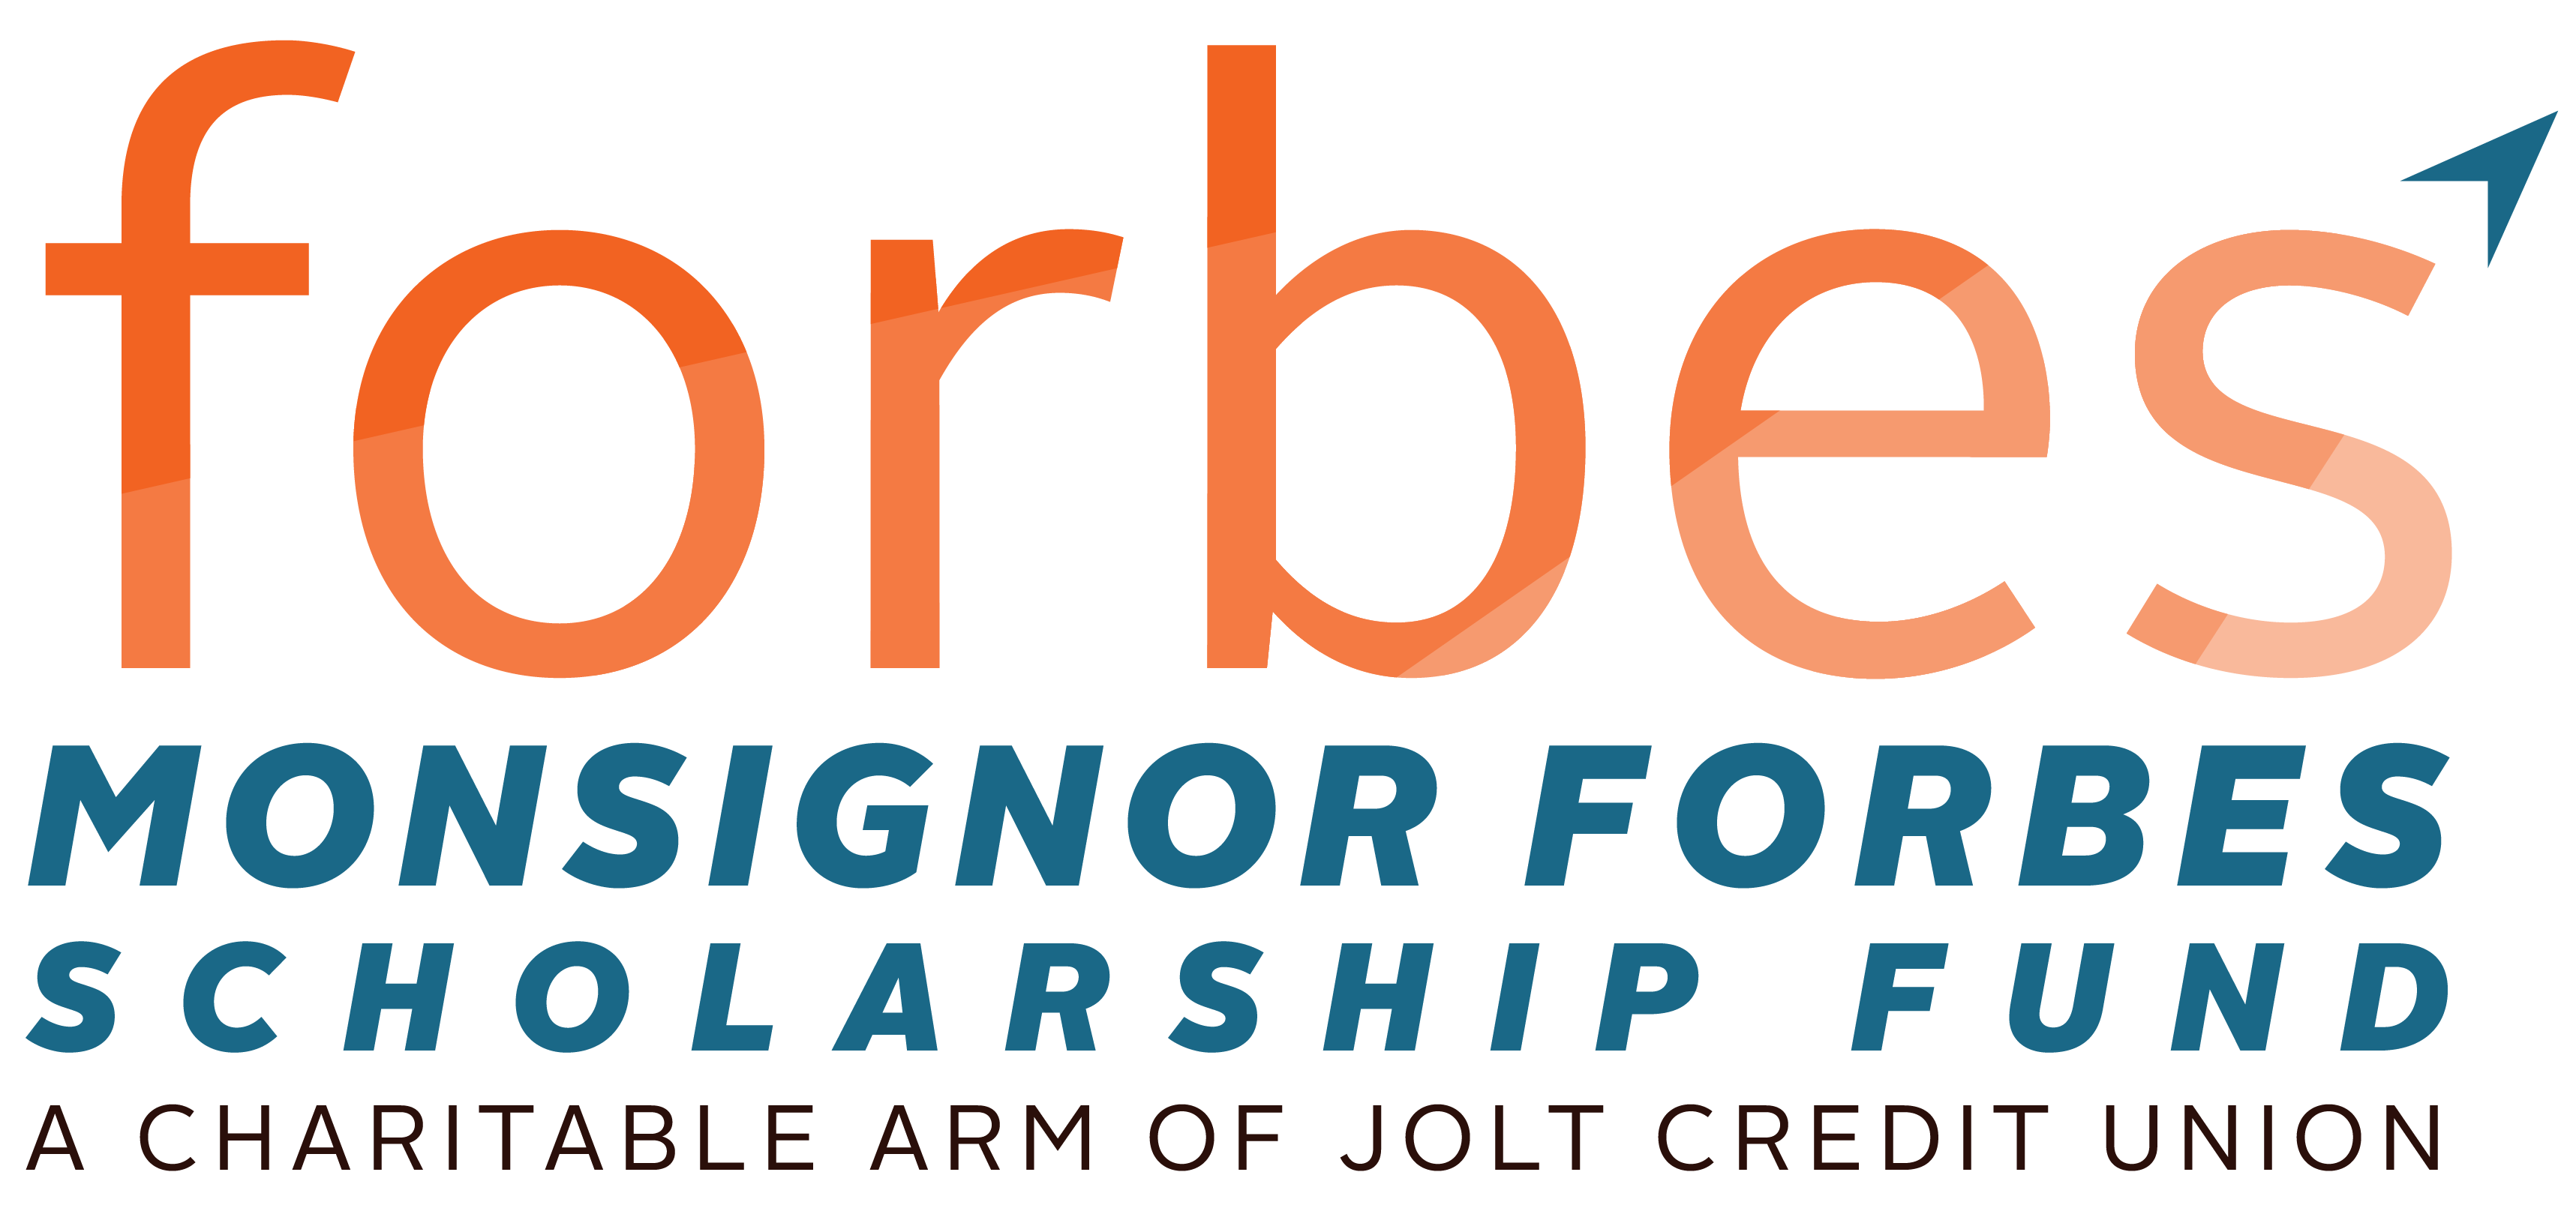 Monsignor Forbes Scholarship Fund - A Charitable Arm of Jolt Credit Union